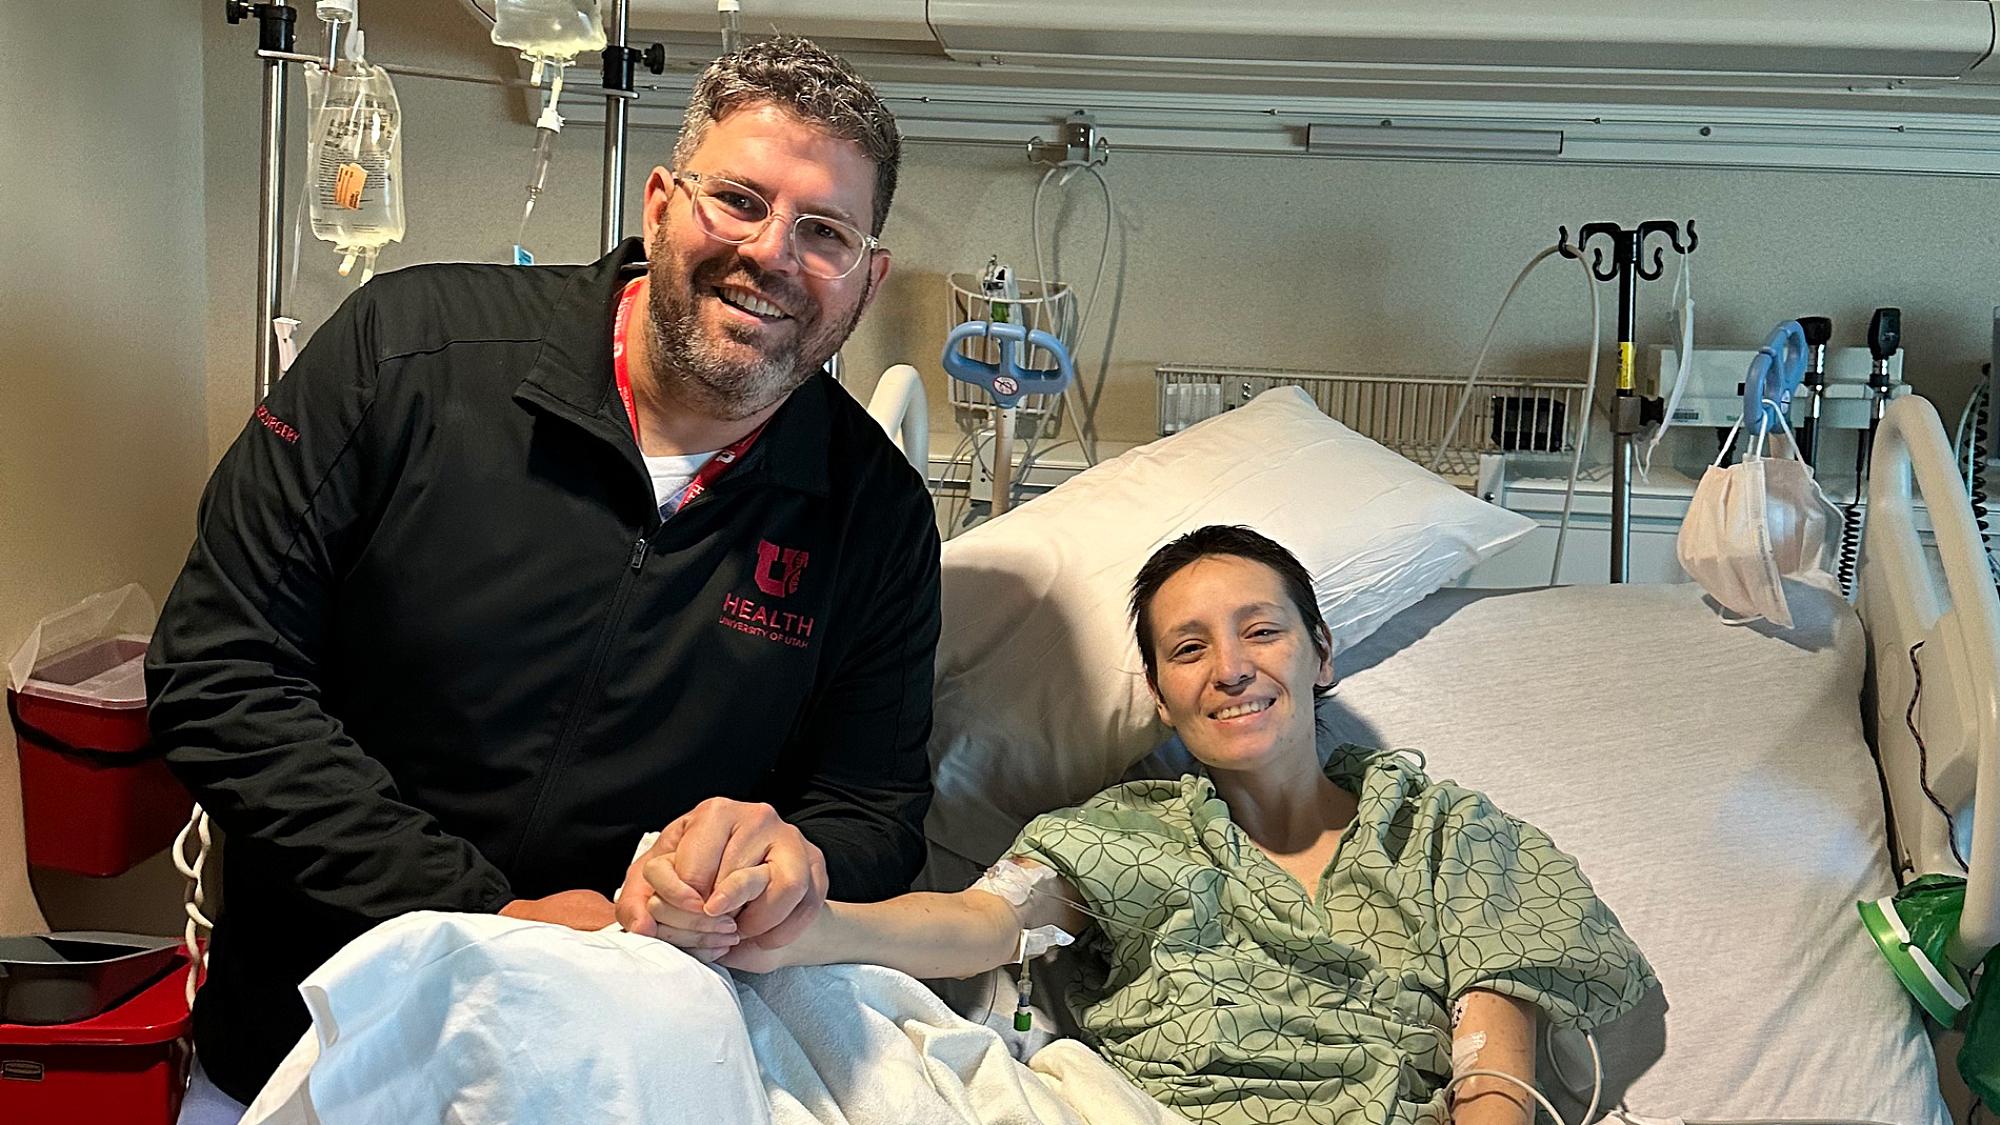 Ben Shofty, MD, PhD, and Natalia Garcia holding hands while she lies in a hospital bed and smiles at the camera